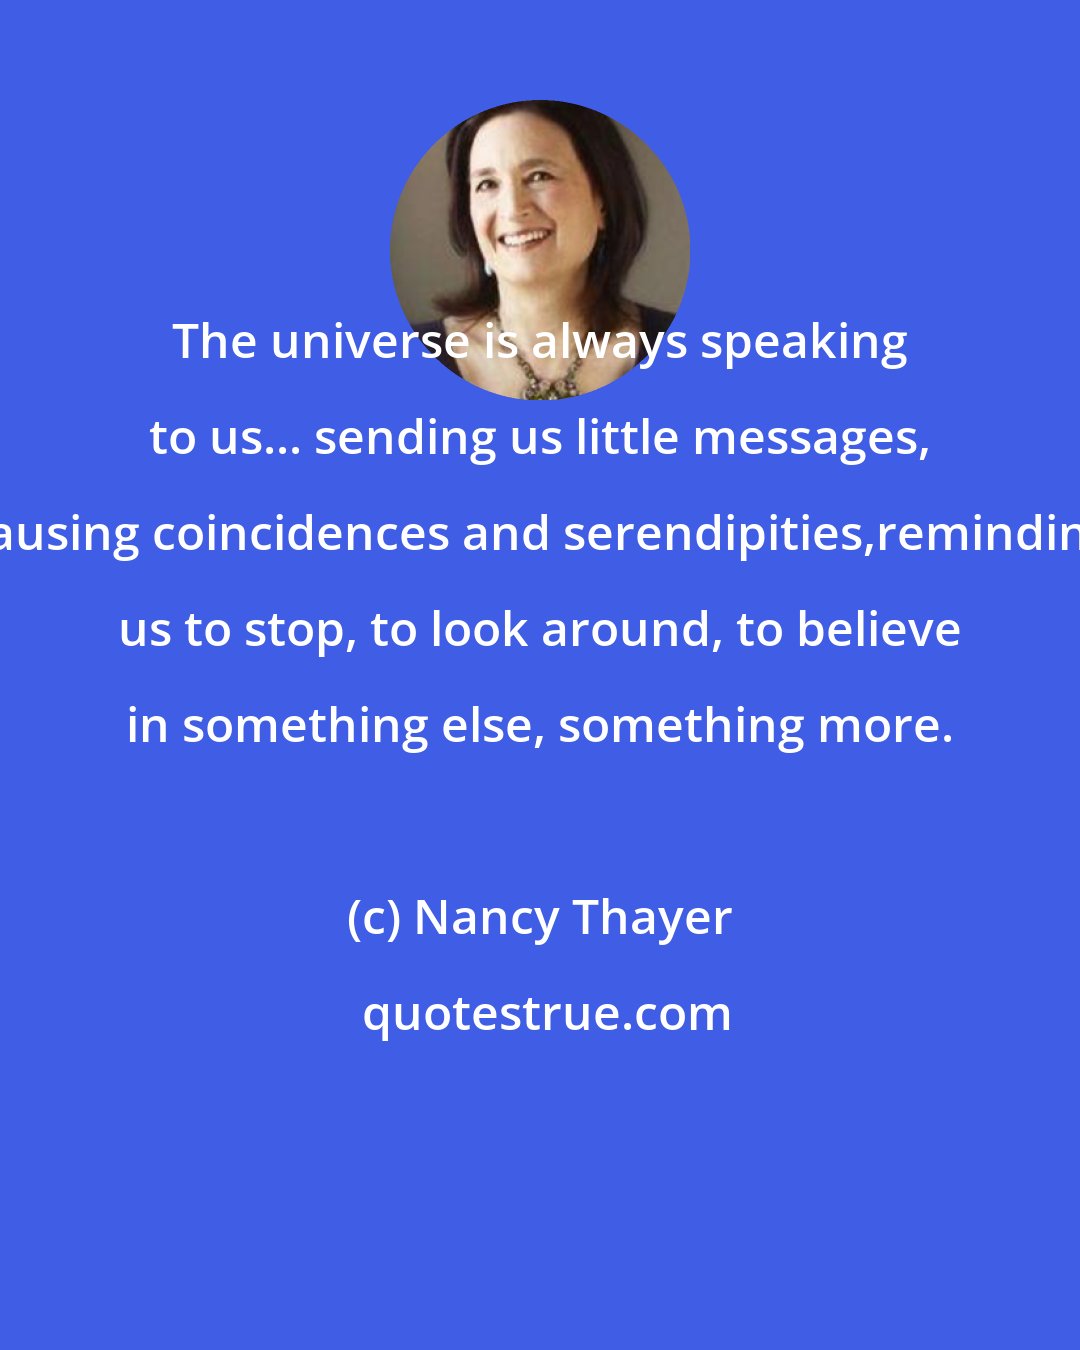 Nancy Thayer: The universe is always speaking to us... sending us little messages, causing coincidences and serendipities,reminding us to stop, to look around, to believe in something else, something more.